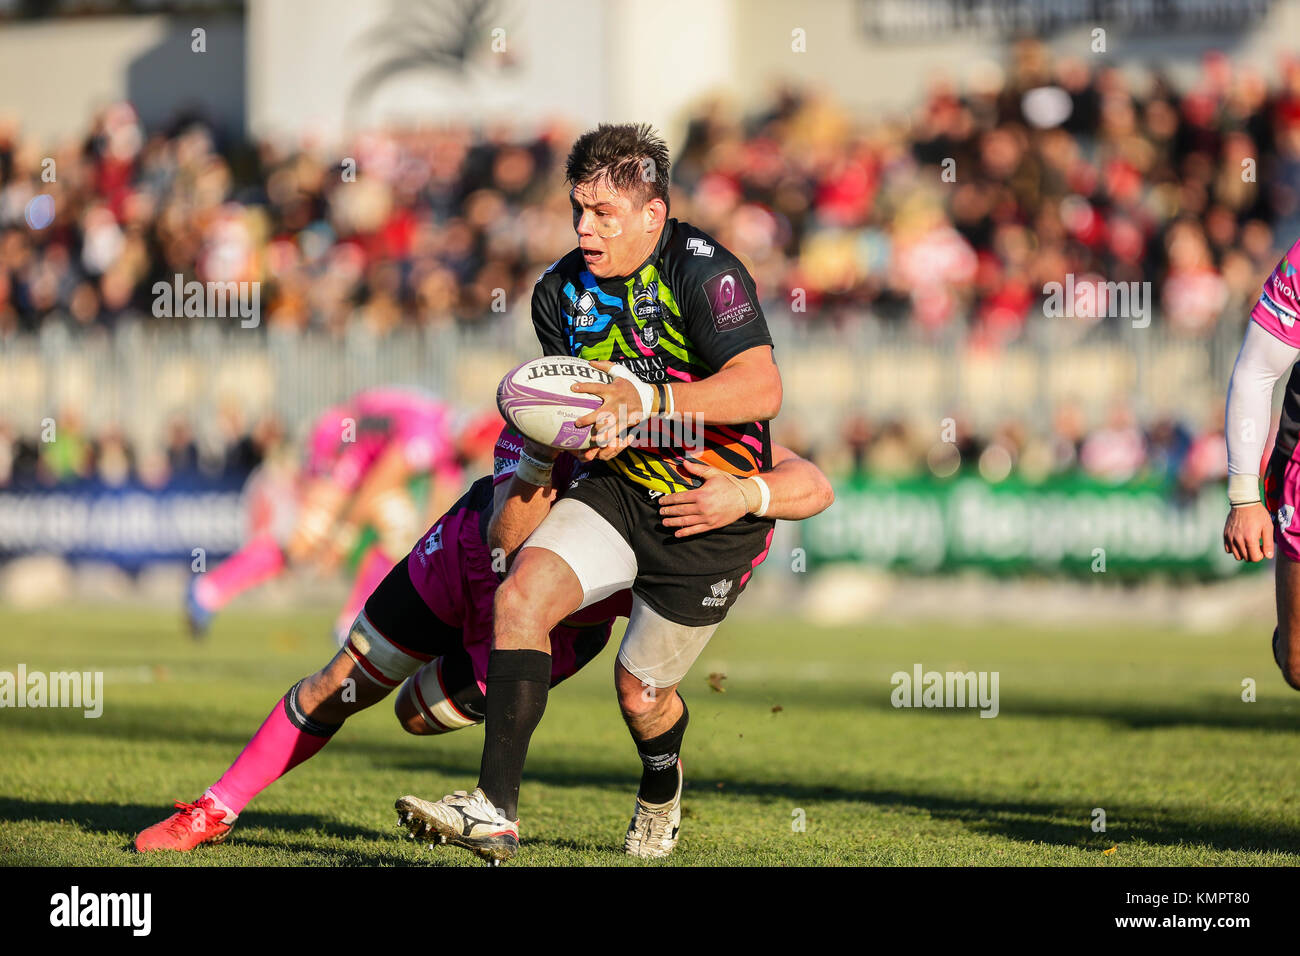 Parma, Italy. 9h December 2017. Zebre's hooker Oliviero Fabiani carries the ball in the match against Gloucester in EPCR Challenge Cup 2017/18. Massimiliano Carnabuci/Alamy Live News Stock Photo